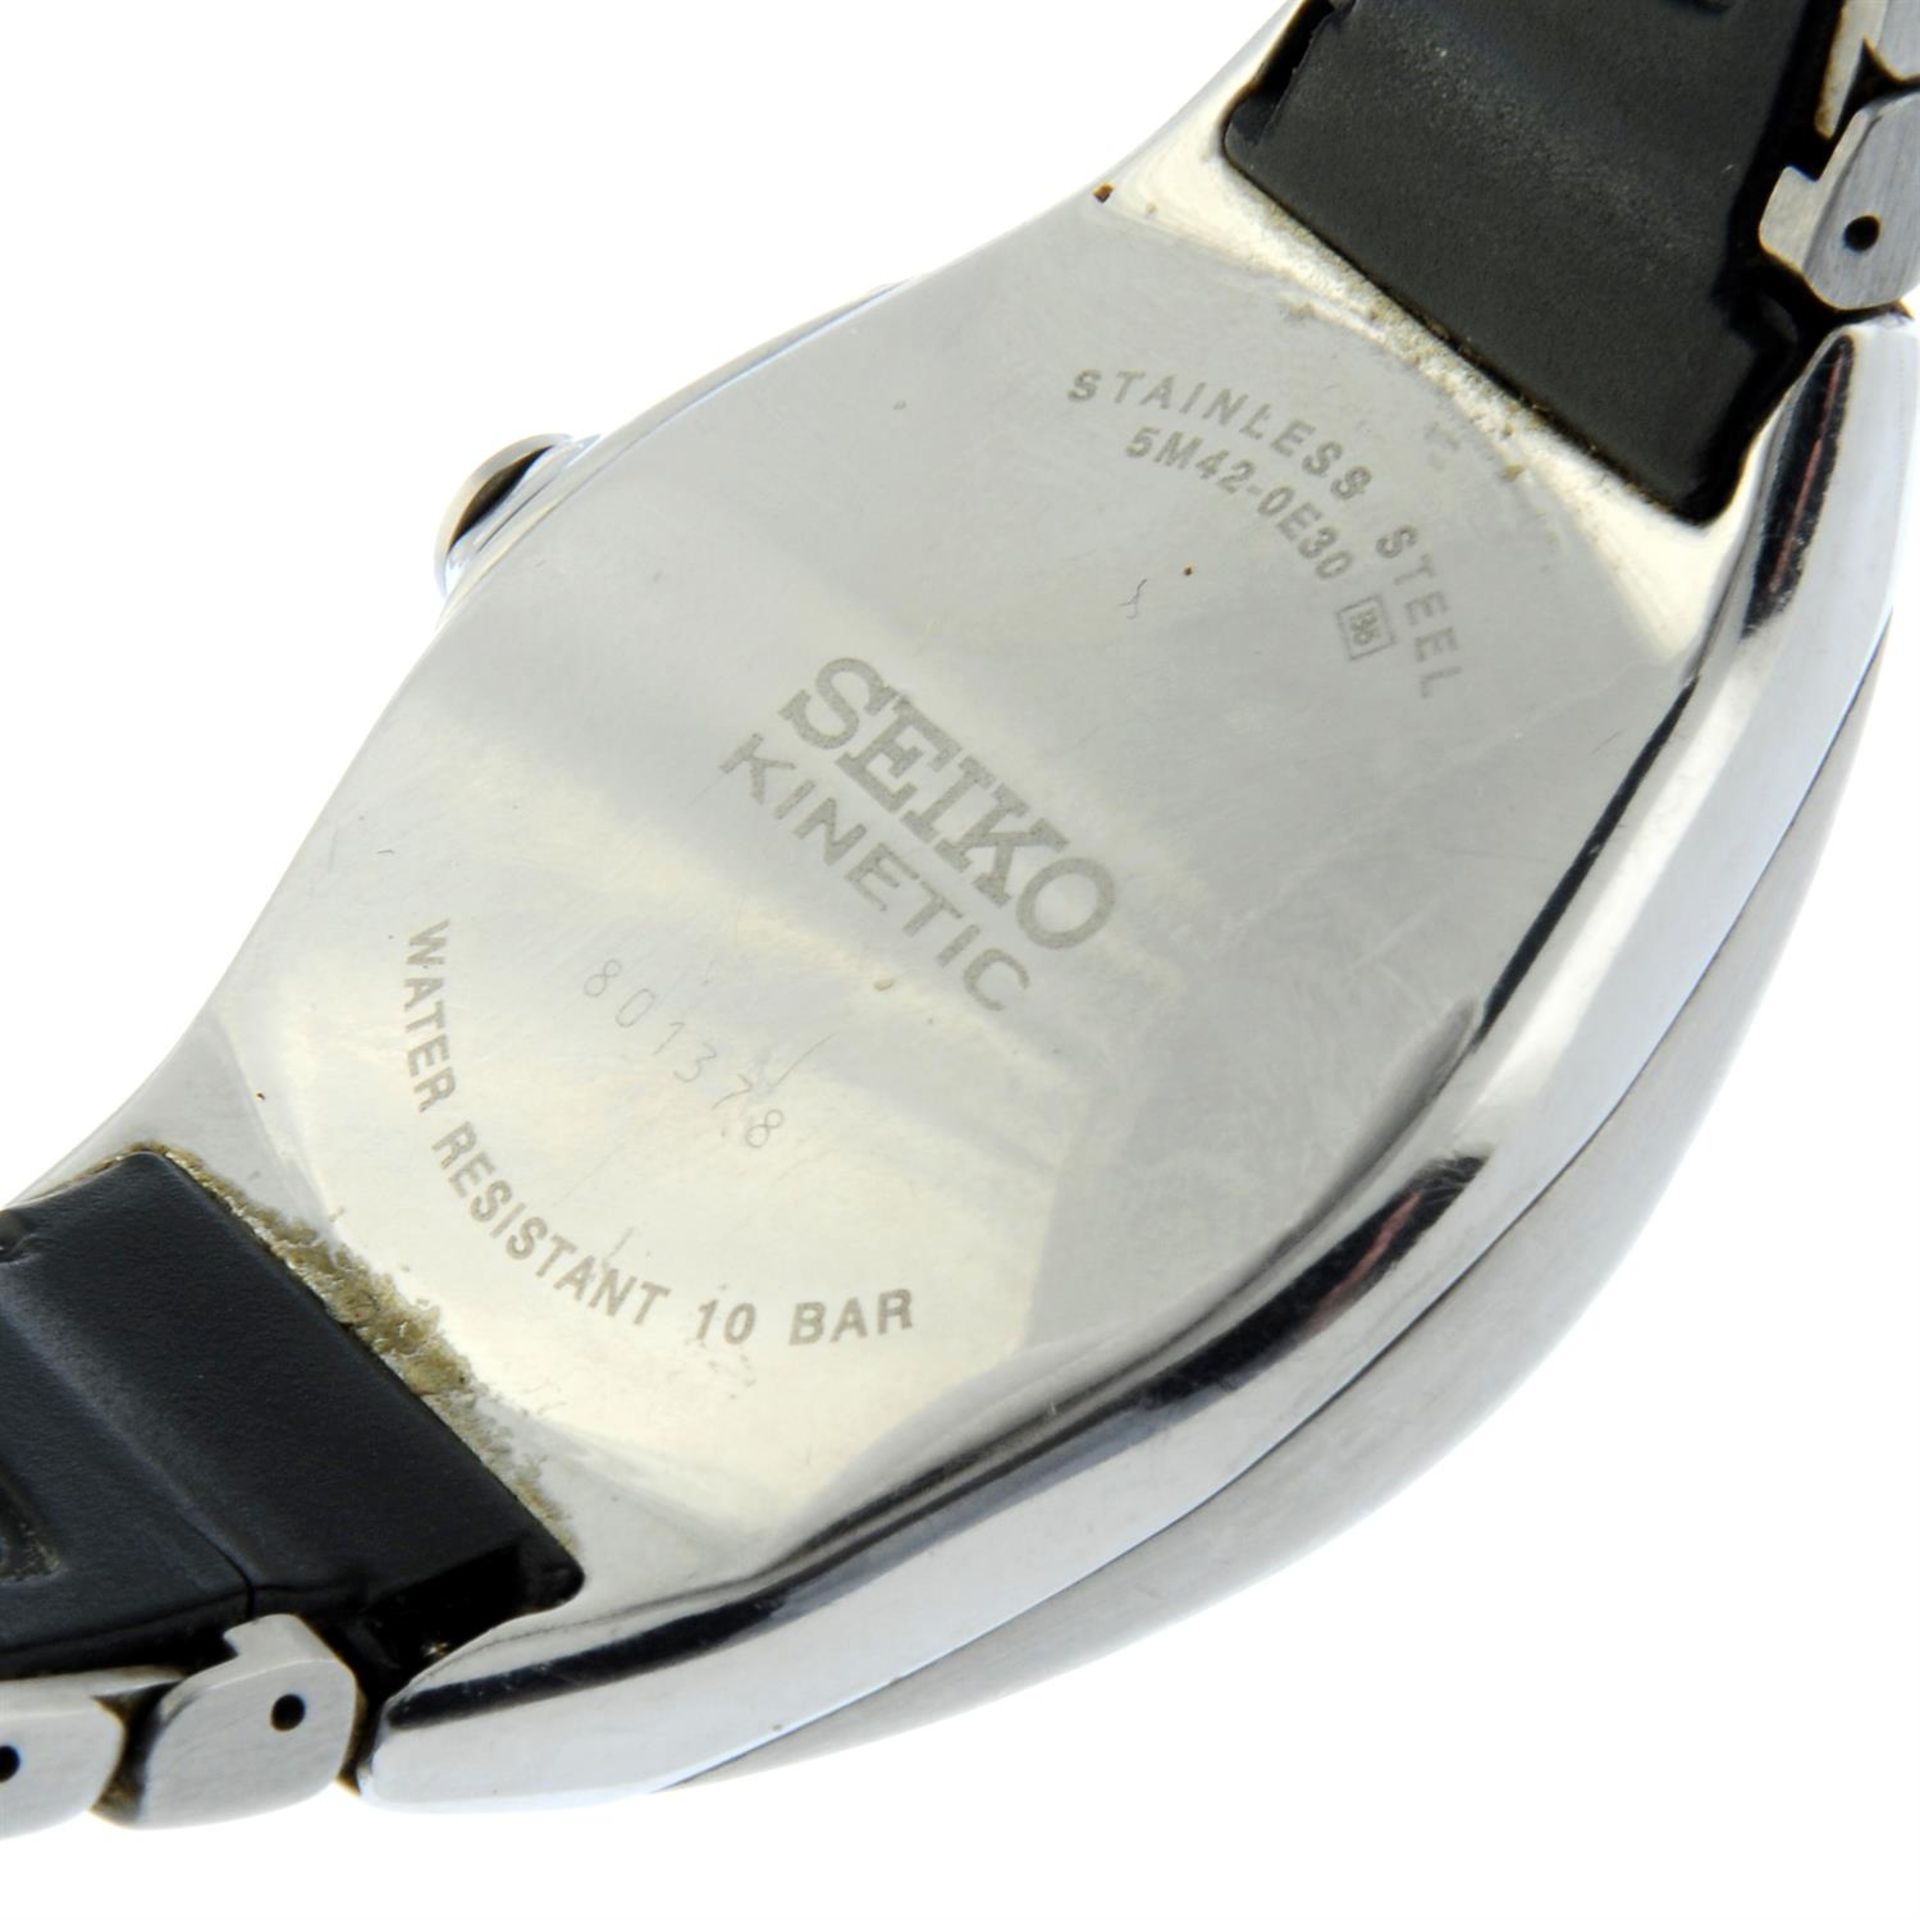 Seiko - a Kinetic watch, 37mm. - Image 4 of 4